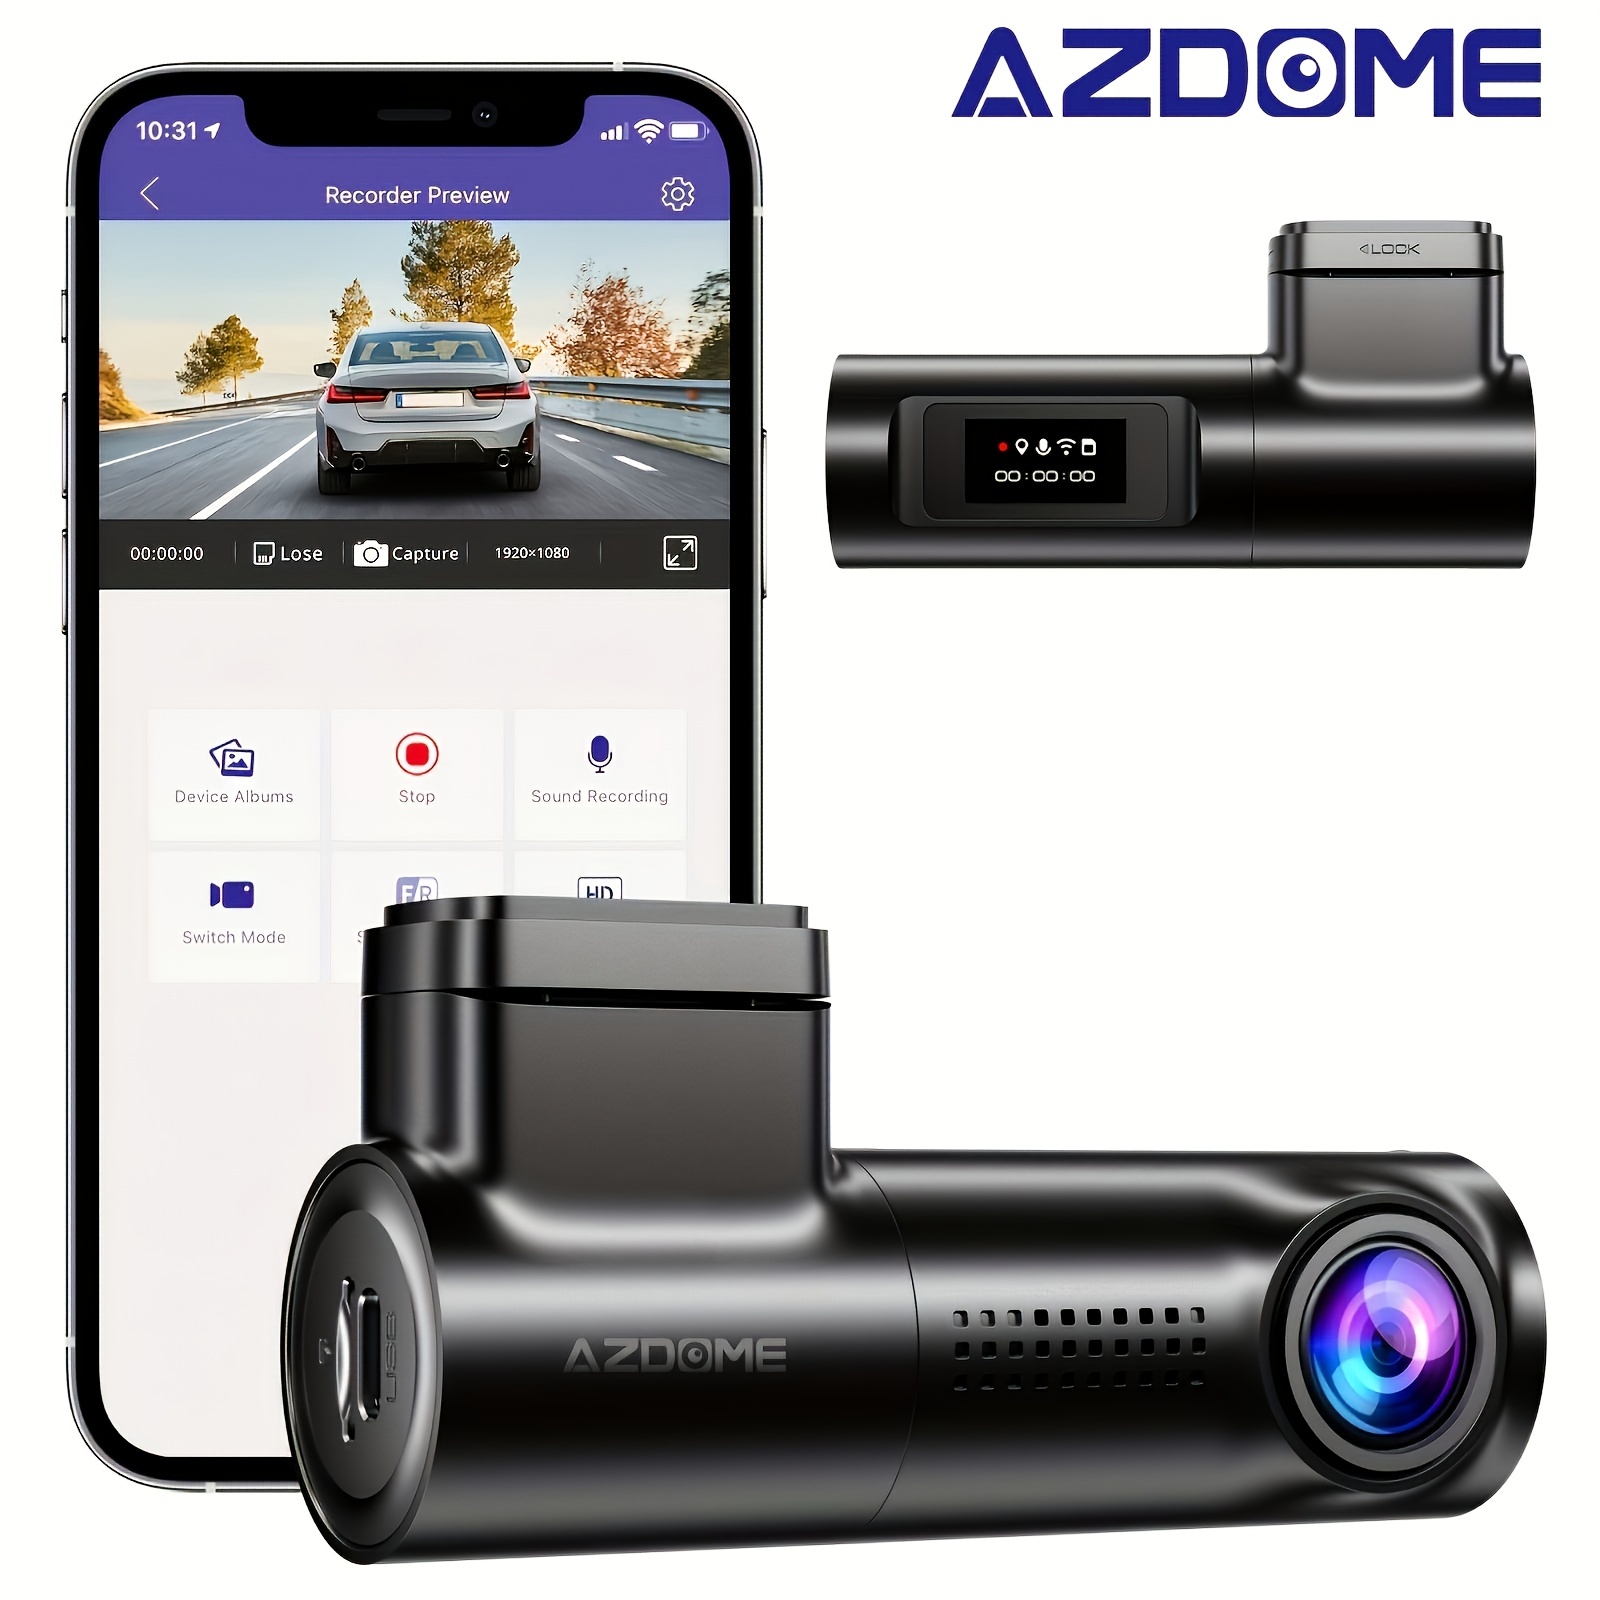 AZDOME M63 Lite 4K Dash Cam Front, 2160P Car Camera with Night Vision WDR,  3 Inch IPS Screen Dash Camera Built-in WiFi, G Sensor Loop Recording 24H